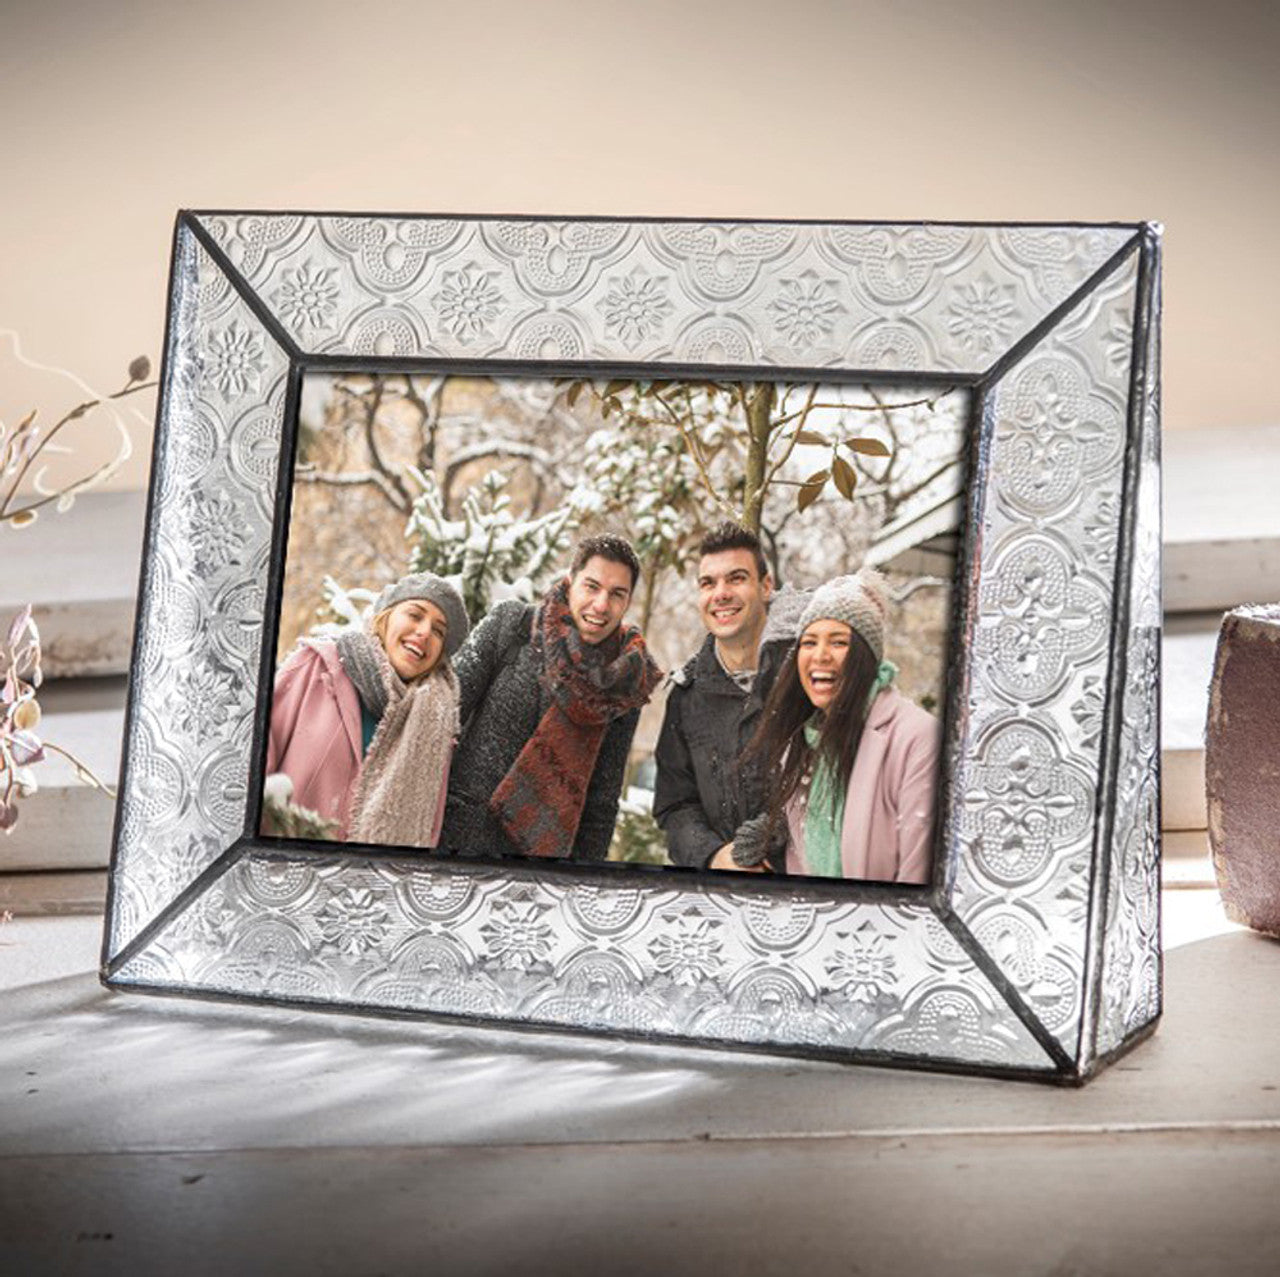 Leaded Glass Picture Frame (Vintage, 4 × 6 Horizontal)